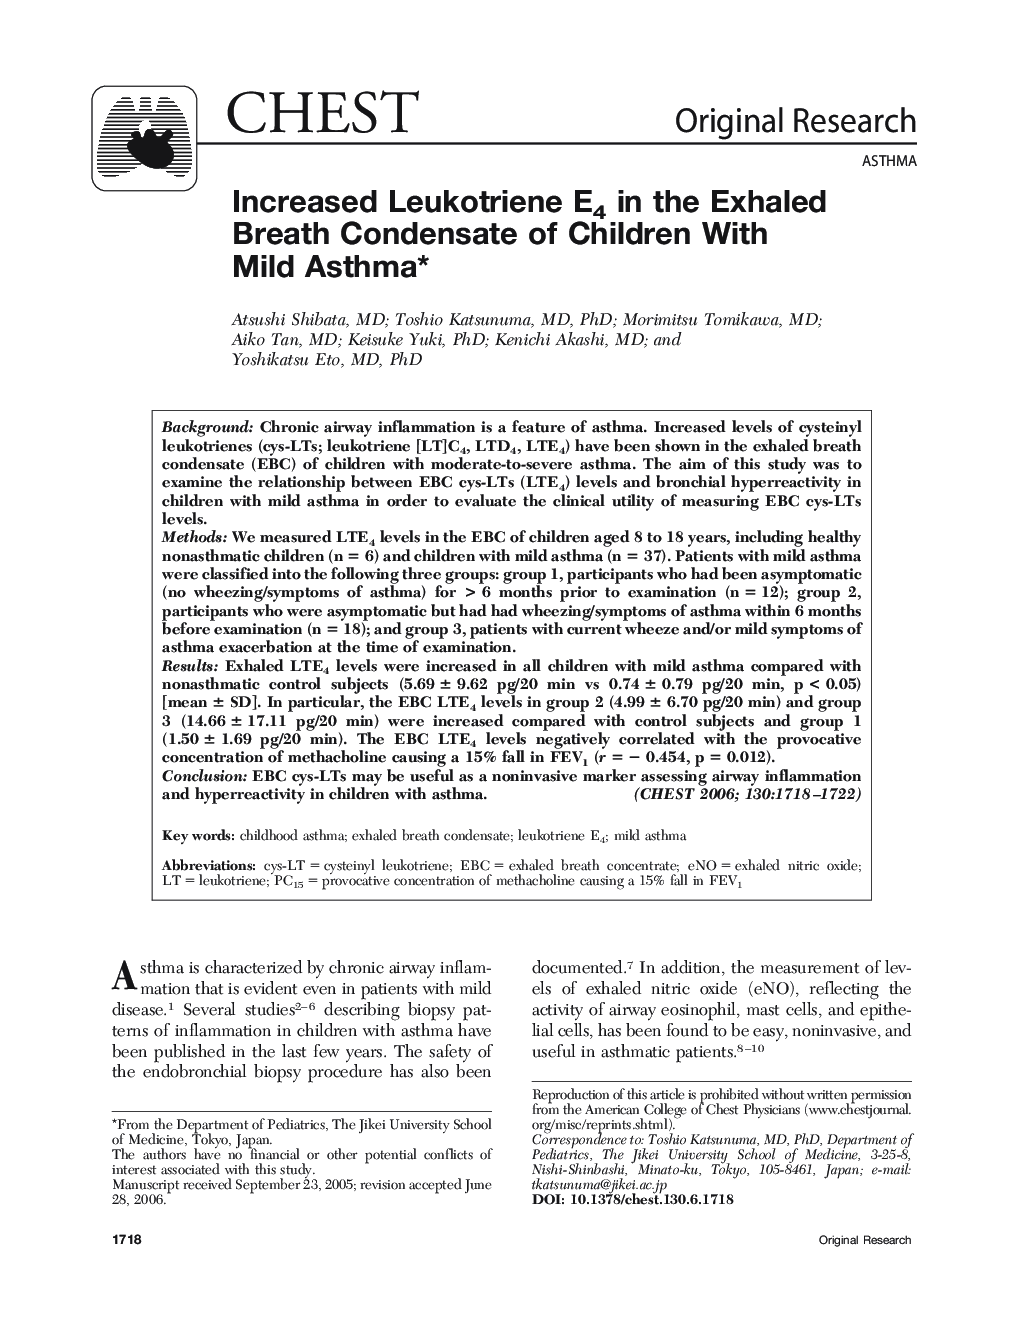 Increased Leukotriene E4 in the Exhaled Breath Condensate of Children With Mild Asthma 